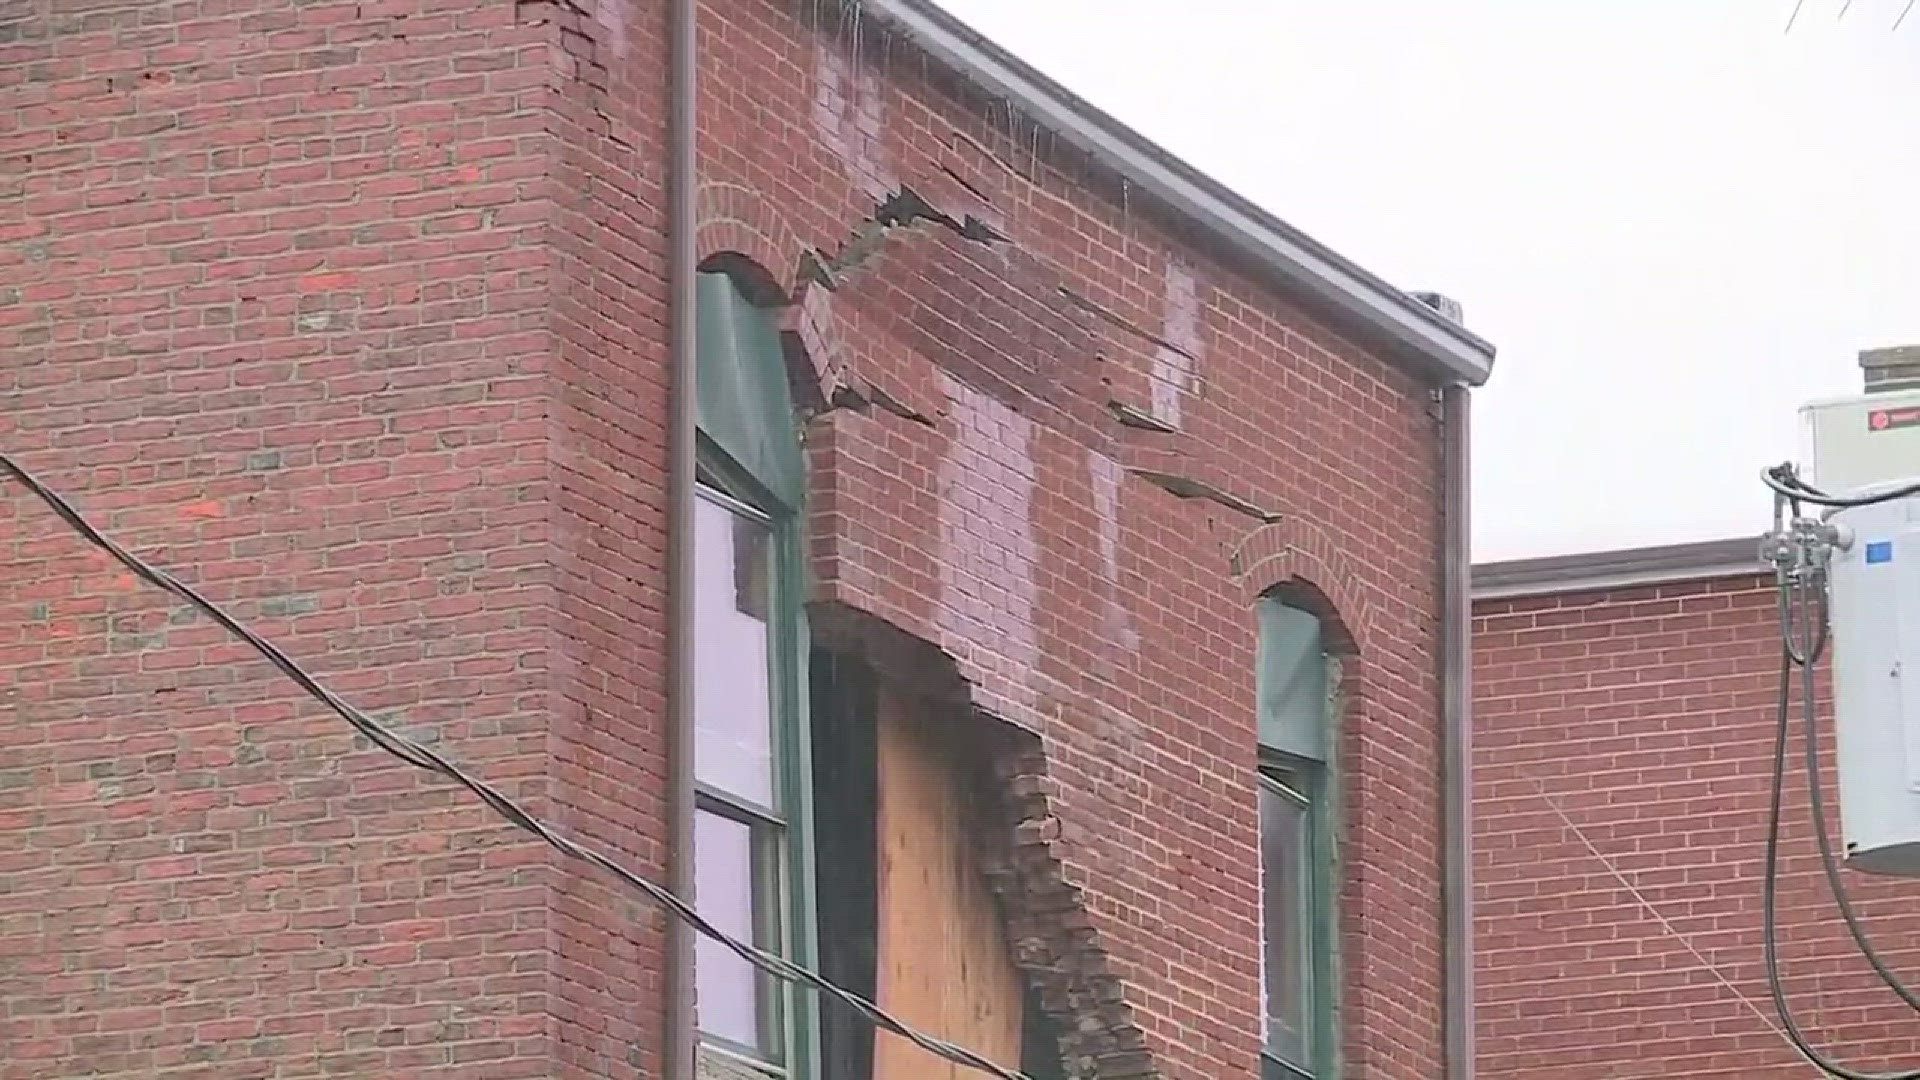 After a partial collapse, siding of a brick building fell on Court Street in Medina.